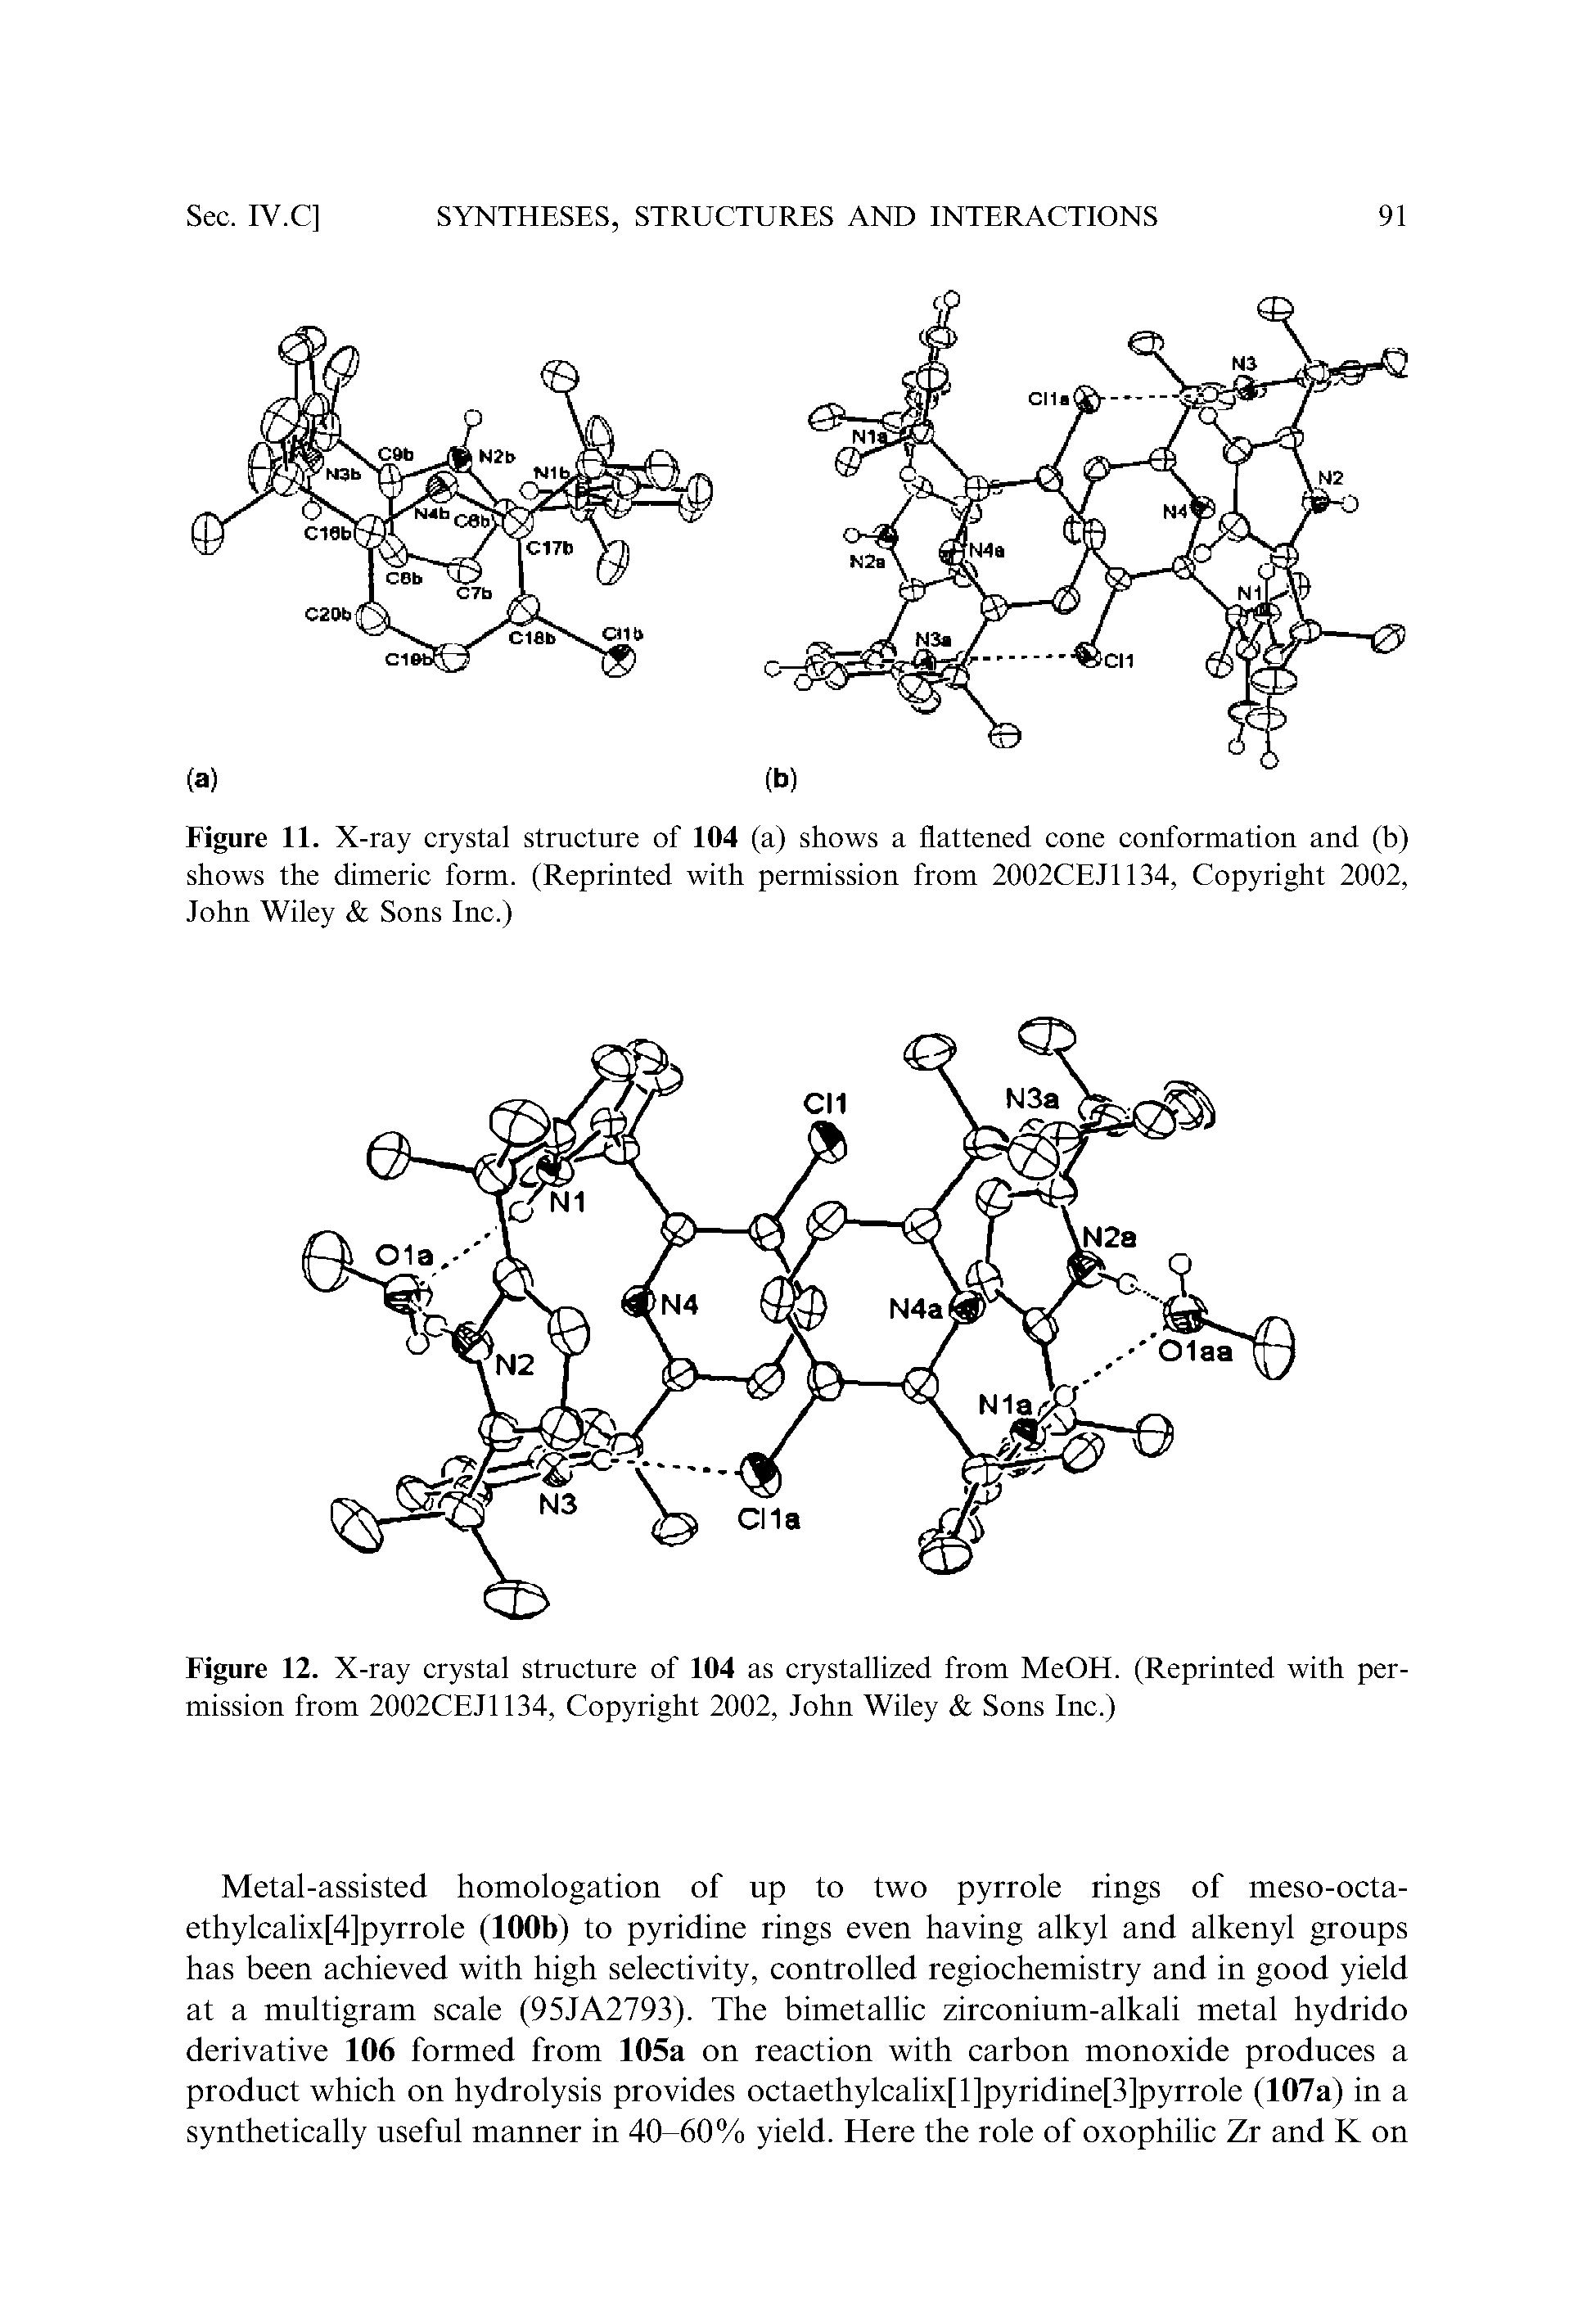 Figure 11. X-ray crystal structure of 104 (a) shows a flattened cone conformation and (b) shows the dimeric form. (Reprinted with permission from 2002CEJ1134, Copyright 2002, John Wiley Sons Inc.)...